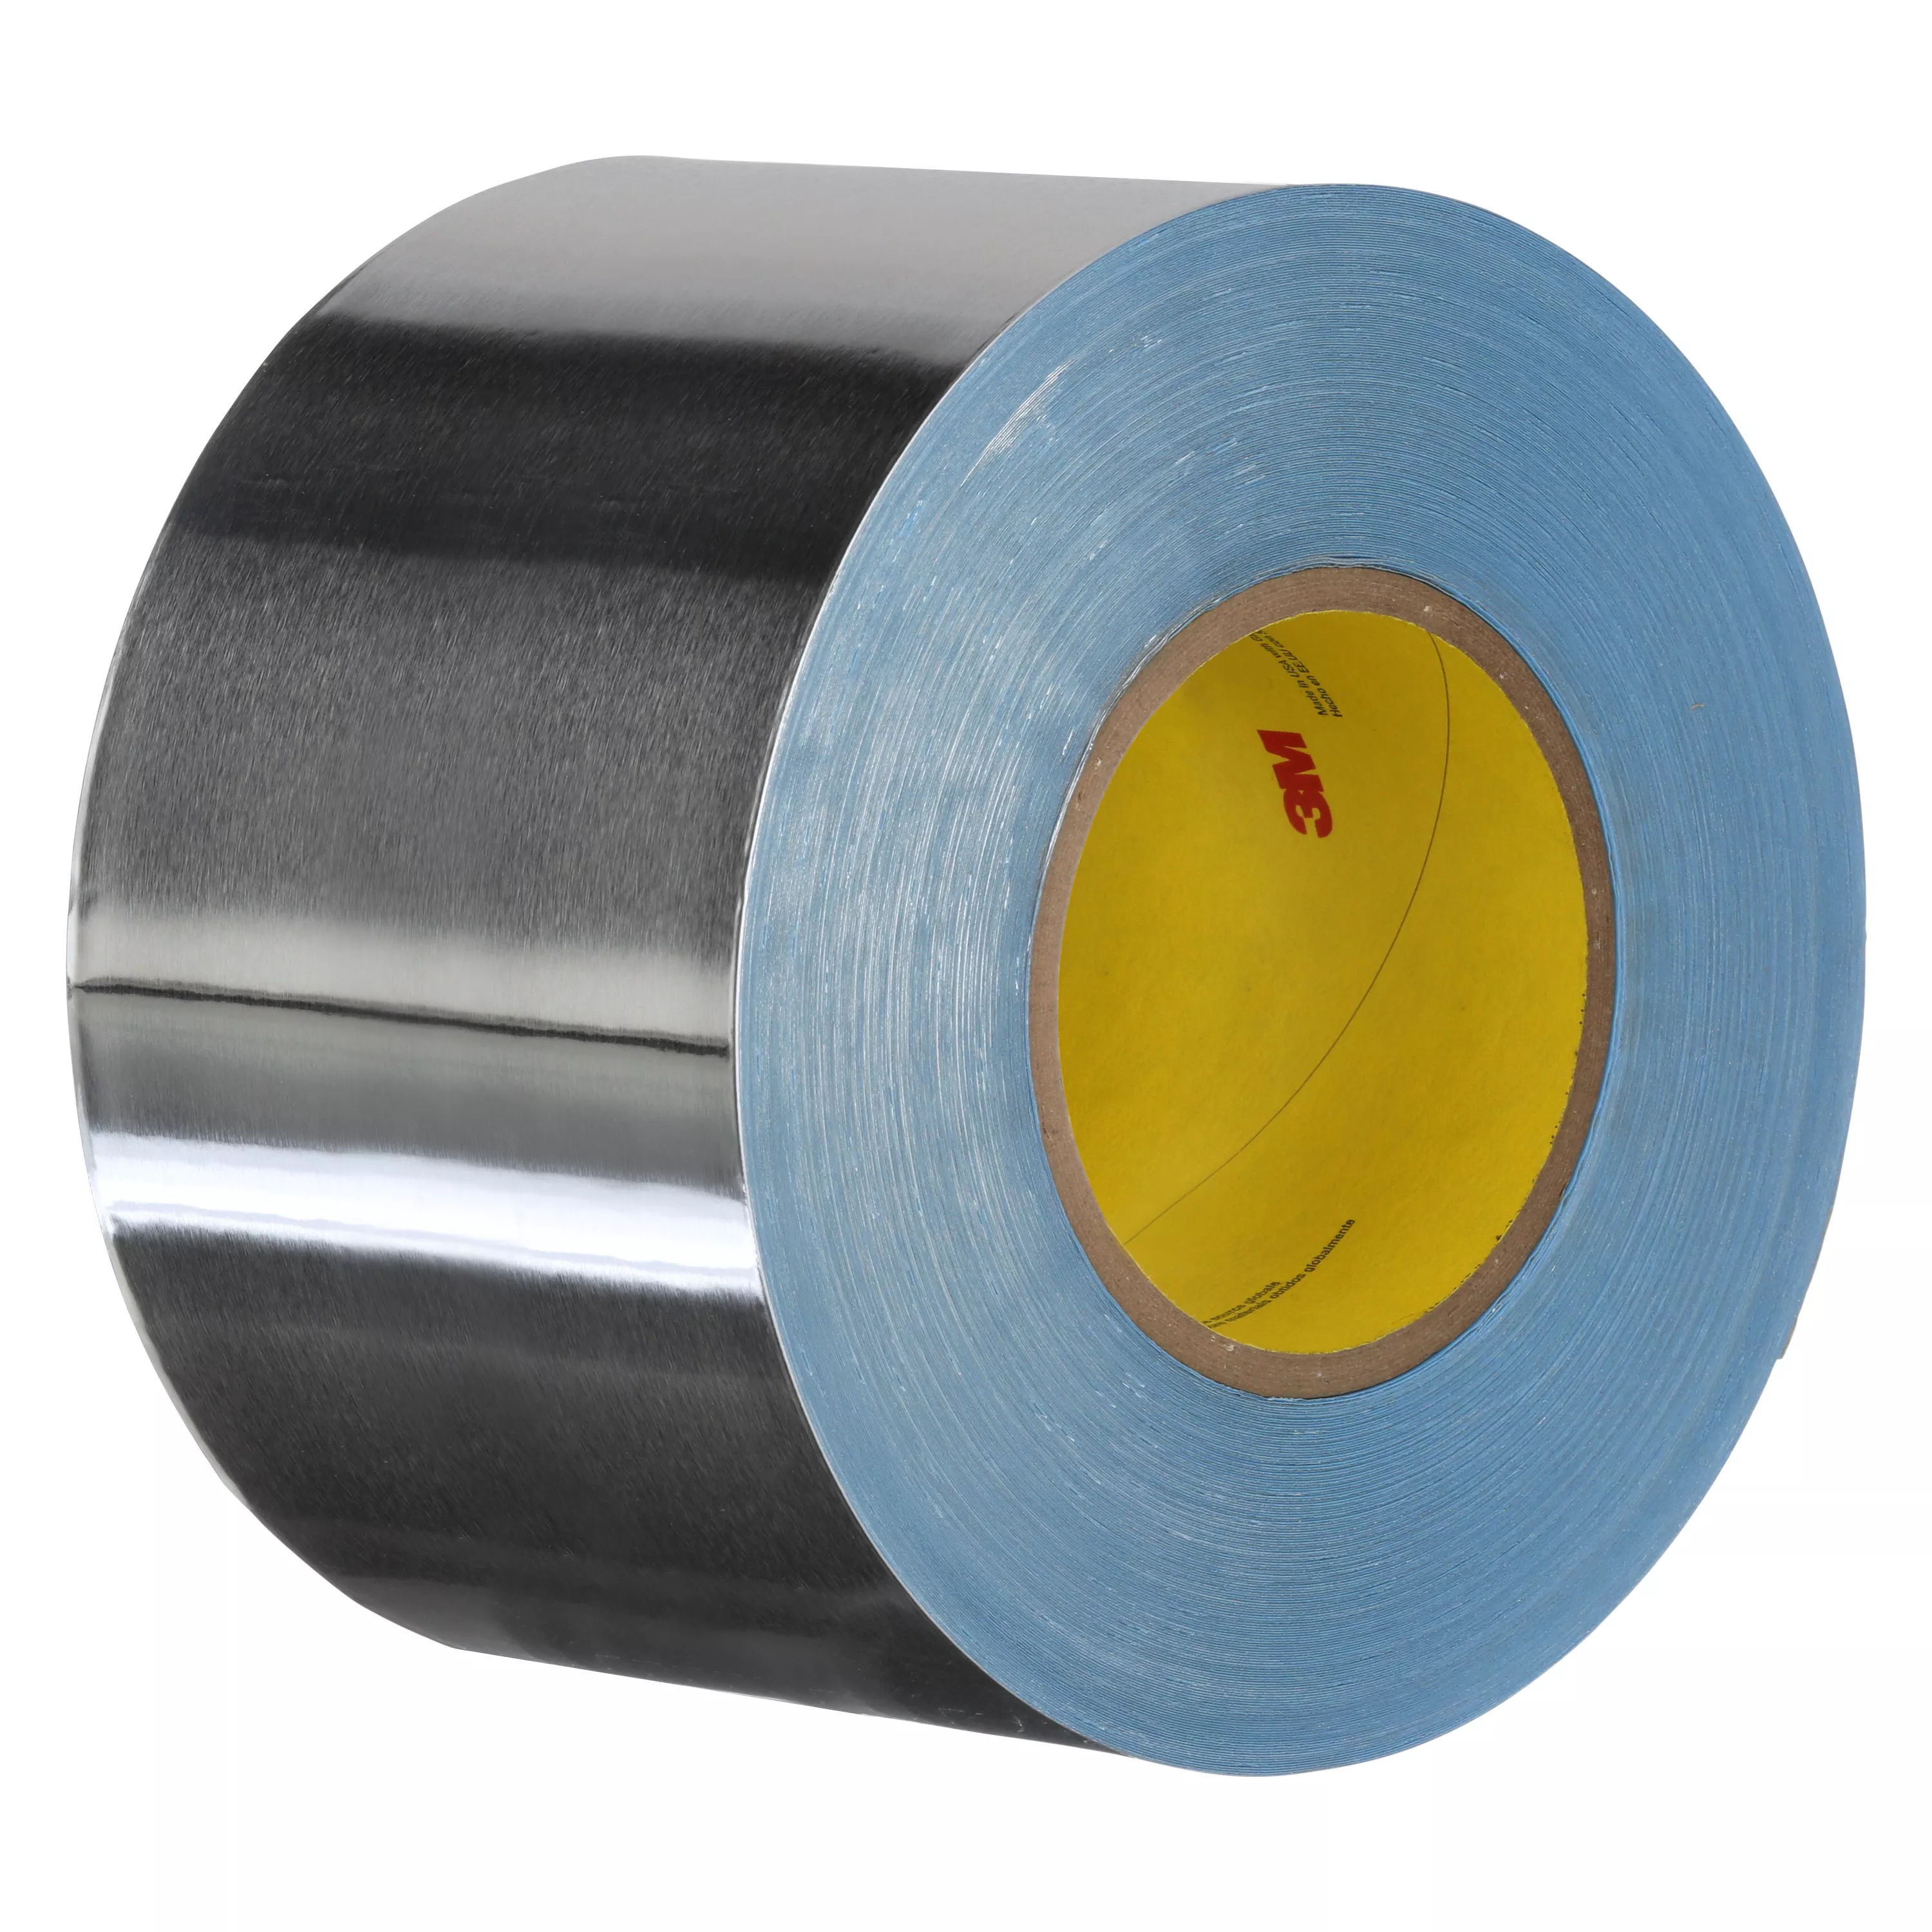 3M™ Vibration Damping Tape 434, Silver, 3 in x 60 yd, 7.5 mil, 3
Roll/Case